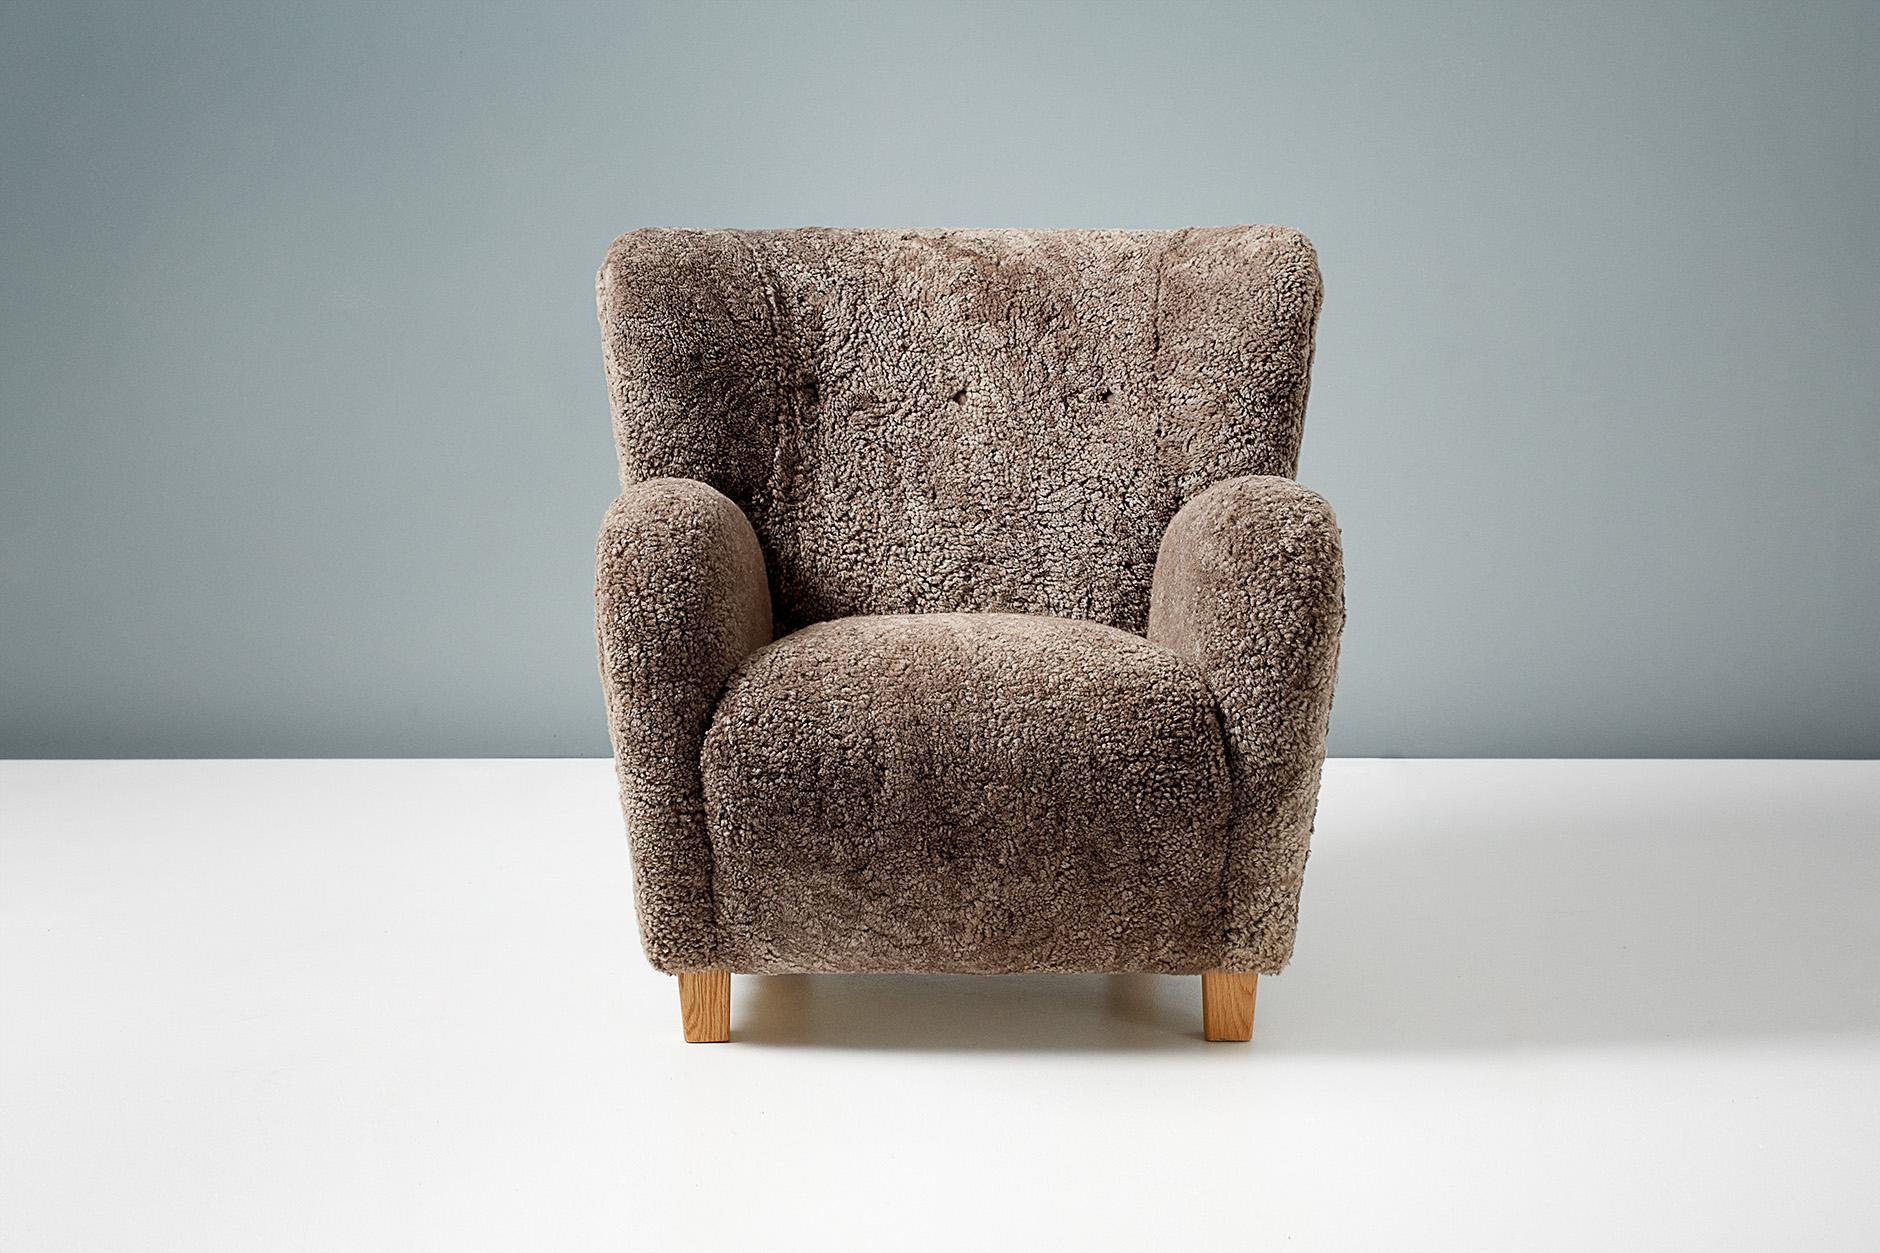 Dagmar design

KARU lounge chair

A custom made lounge chair developed and produced at our workshops in London using the highest quality materials. This example is upholstered in ‘Sahara’ brown Australian shearling and features oiled European